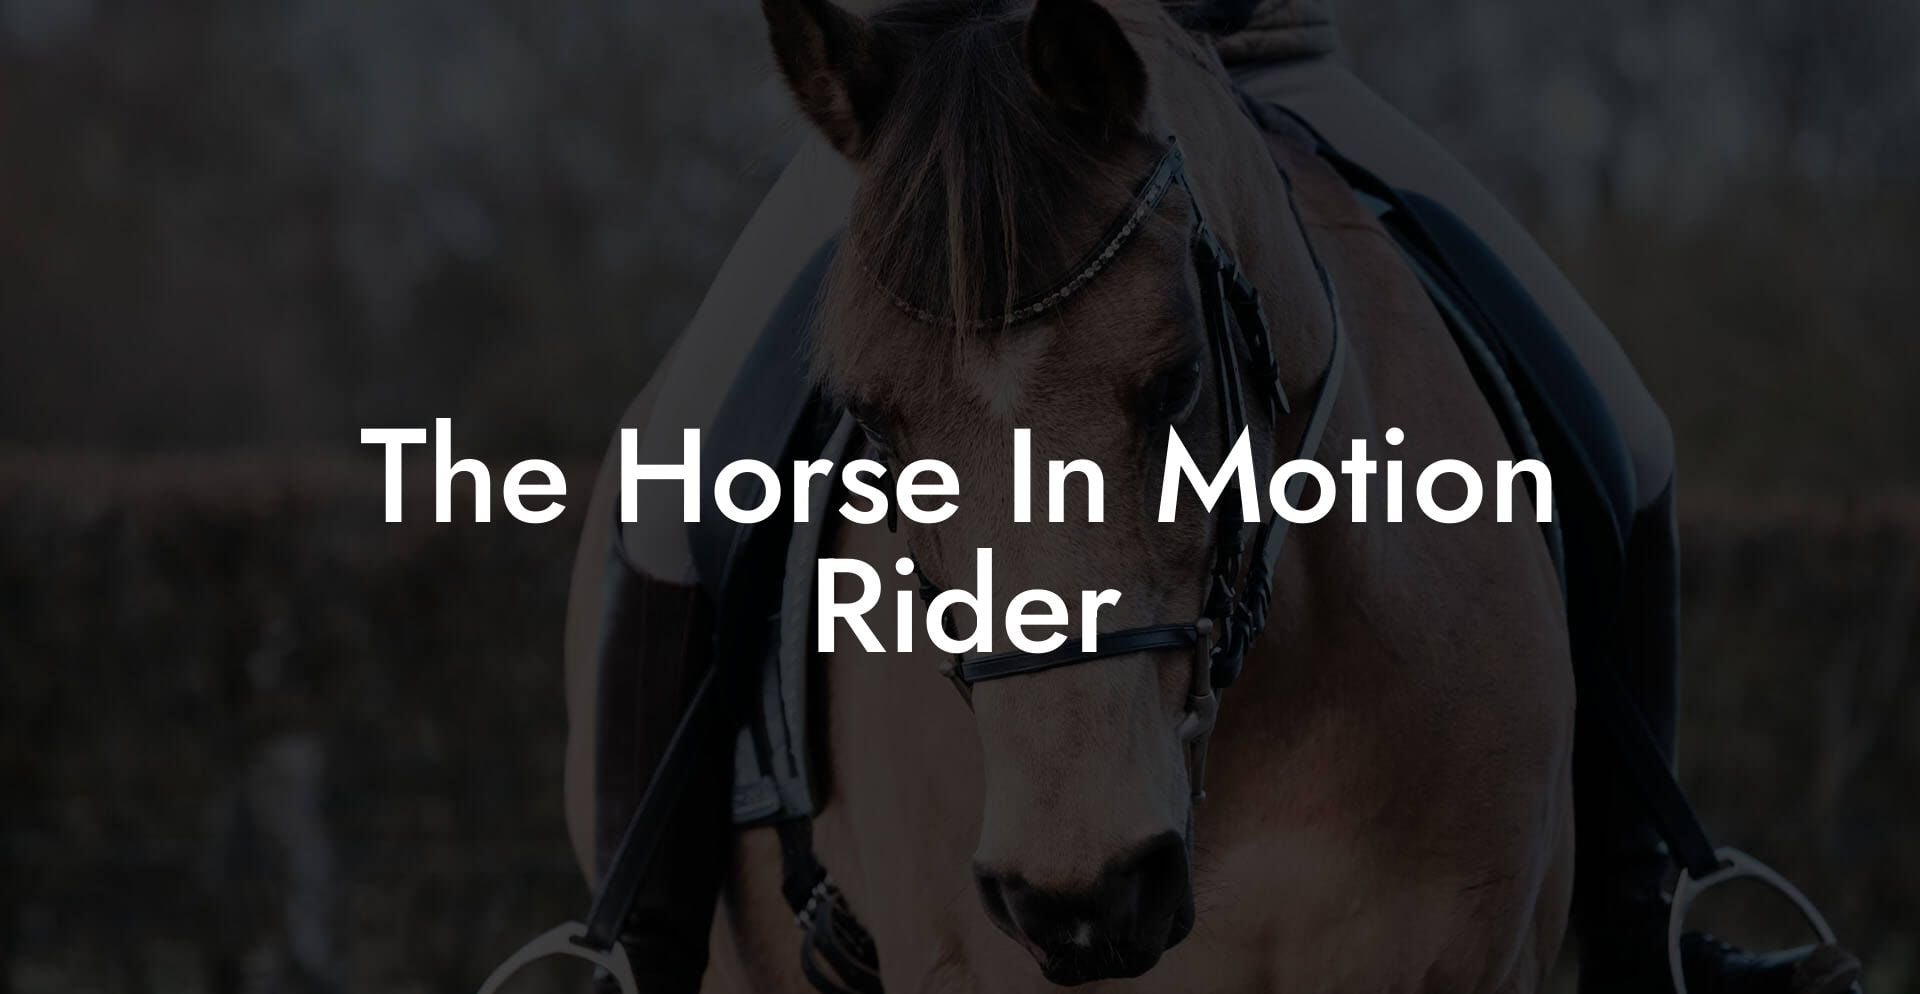 The Horse In Motion Rider